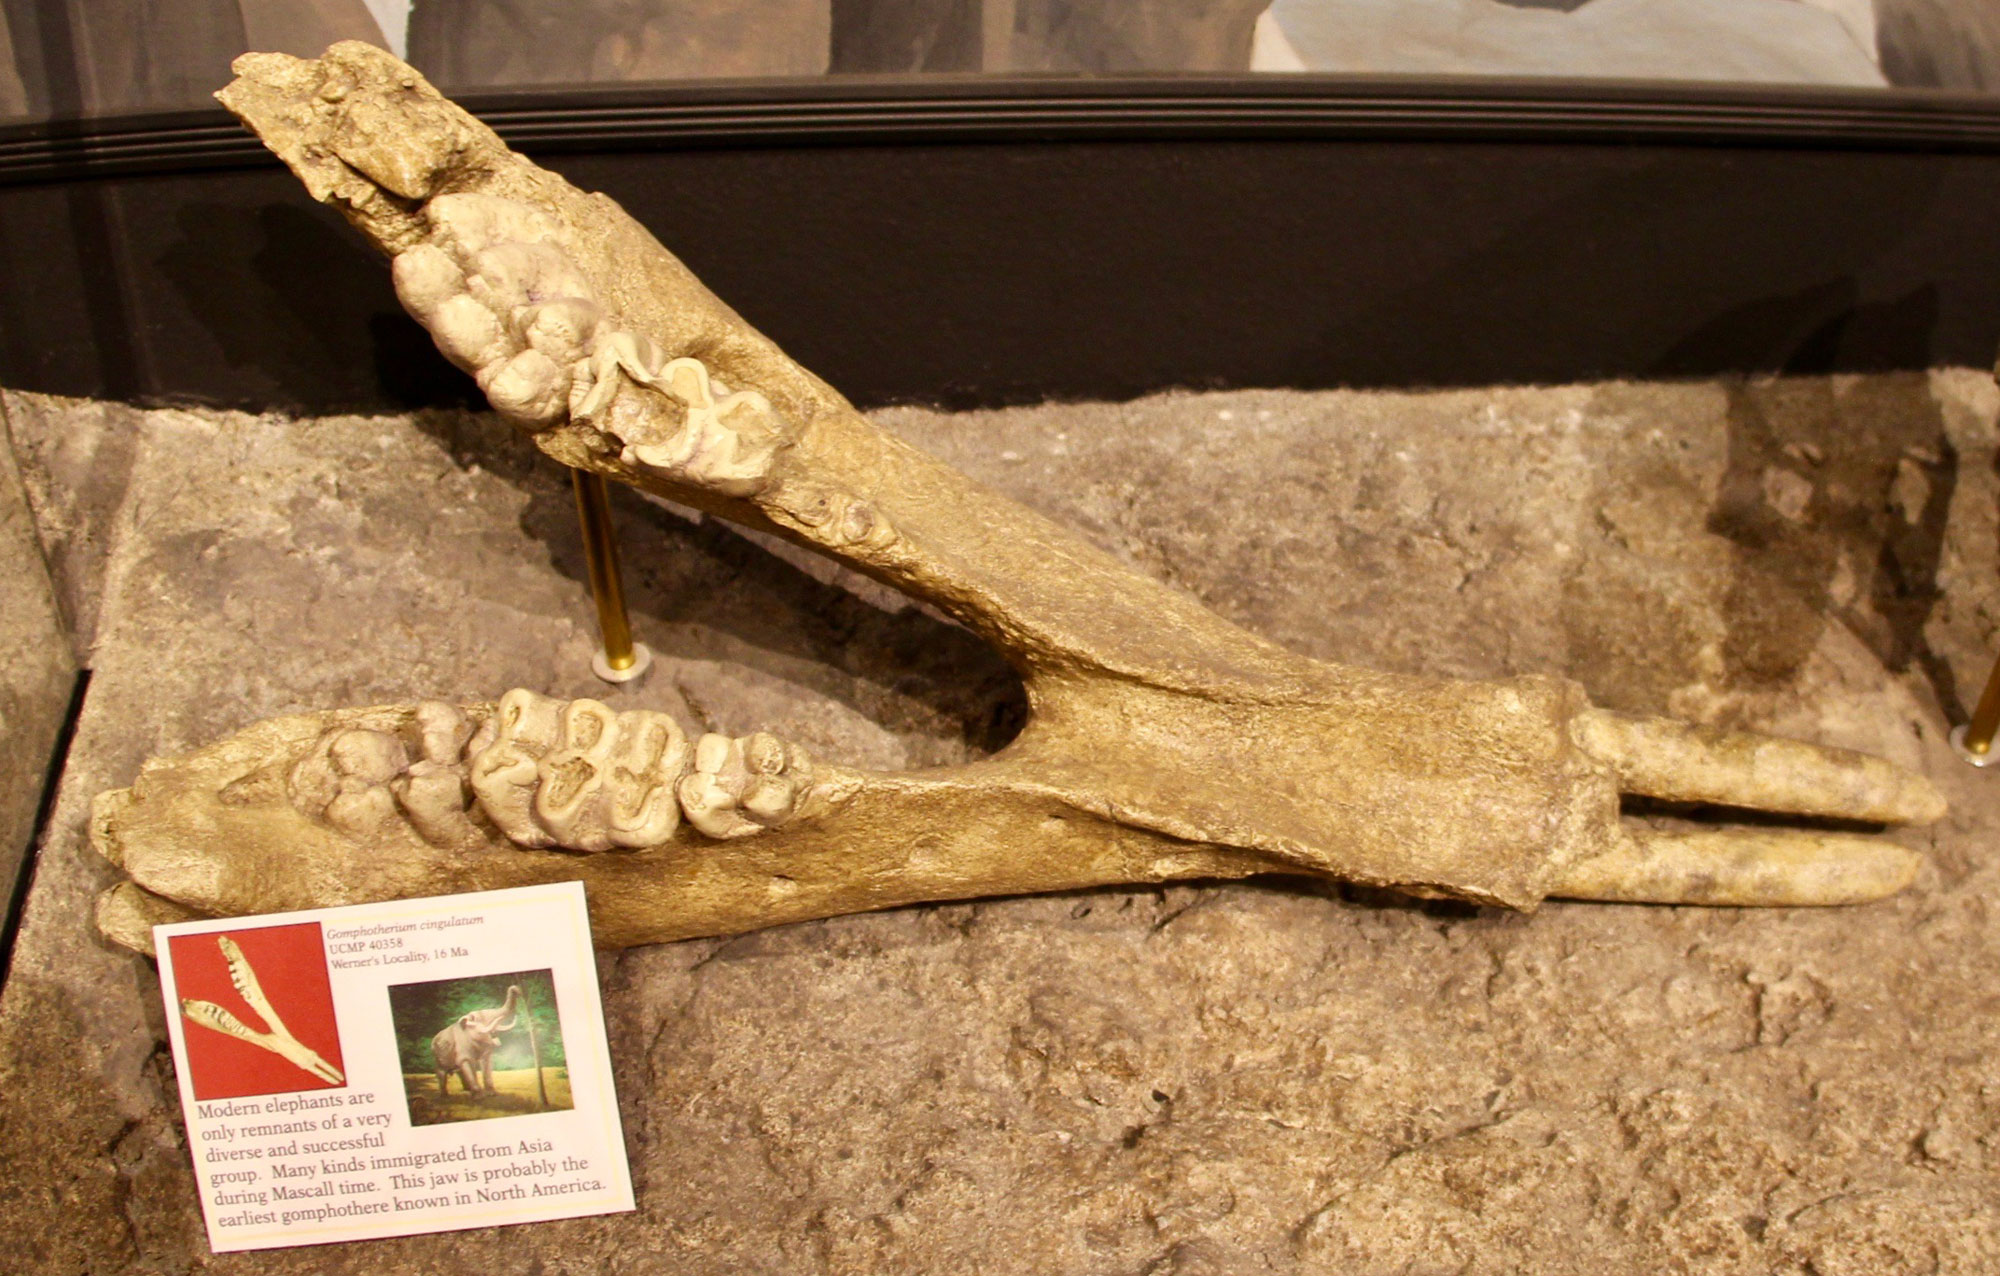 Photograph of the lower jaw of a gomphothere. The jaw has two short tusks protruding from its tip. The molars have multiple cusps and are mastodon-like.